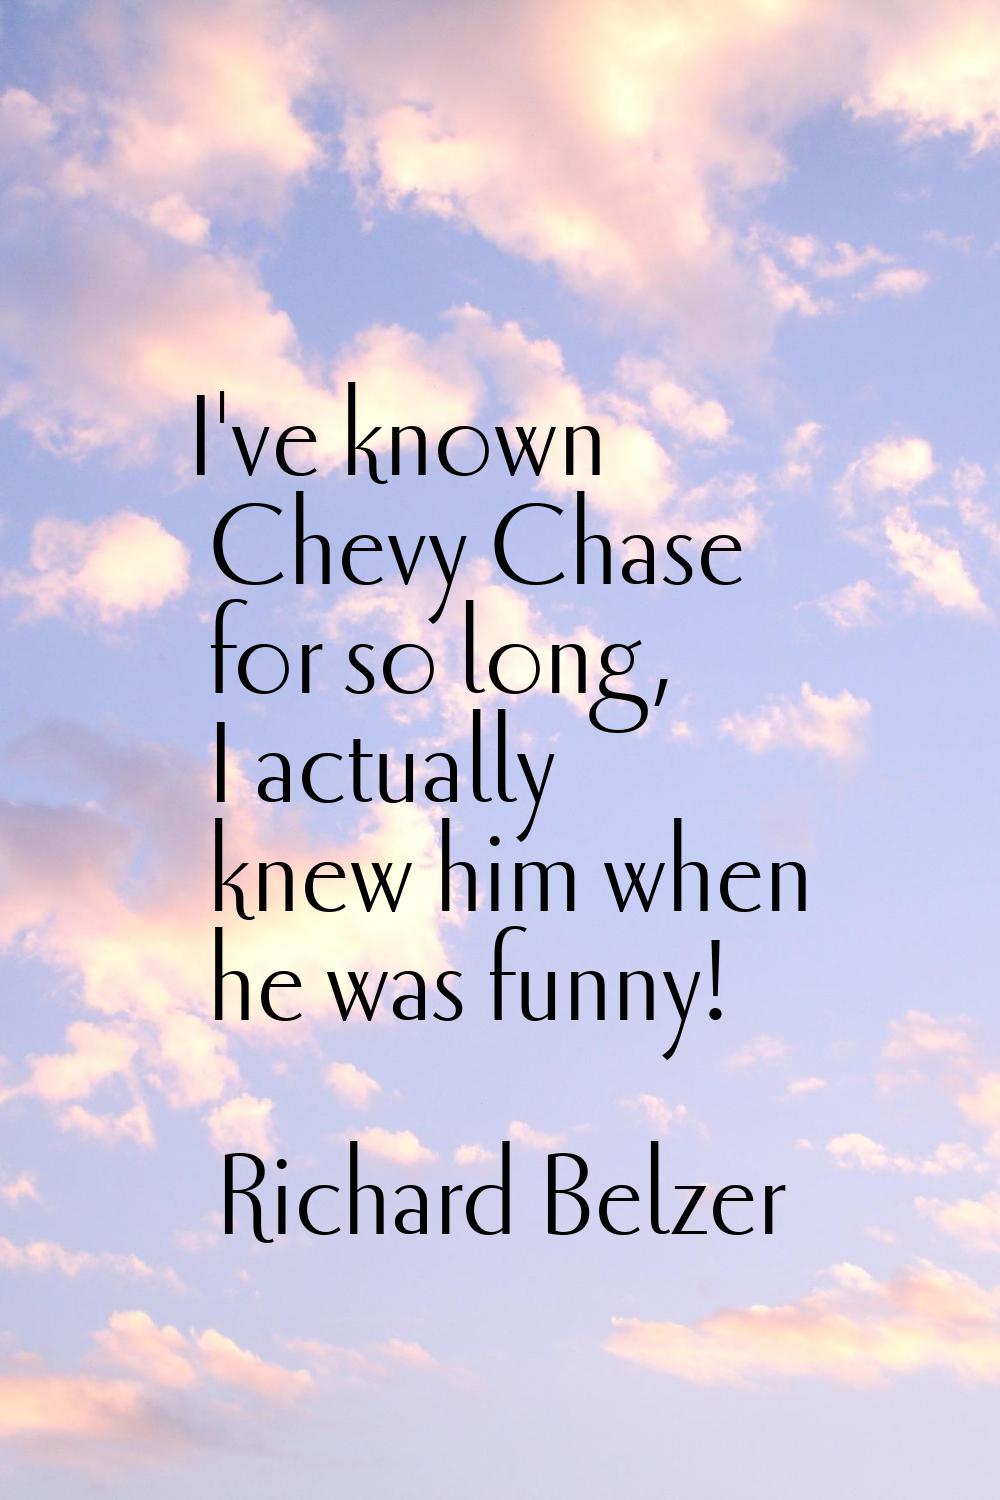 I've known Chevy Chase for so long, I actually knew him when he was funny!